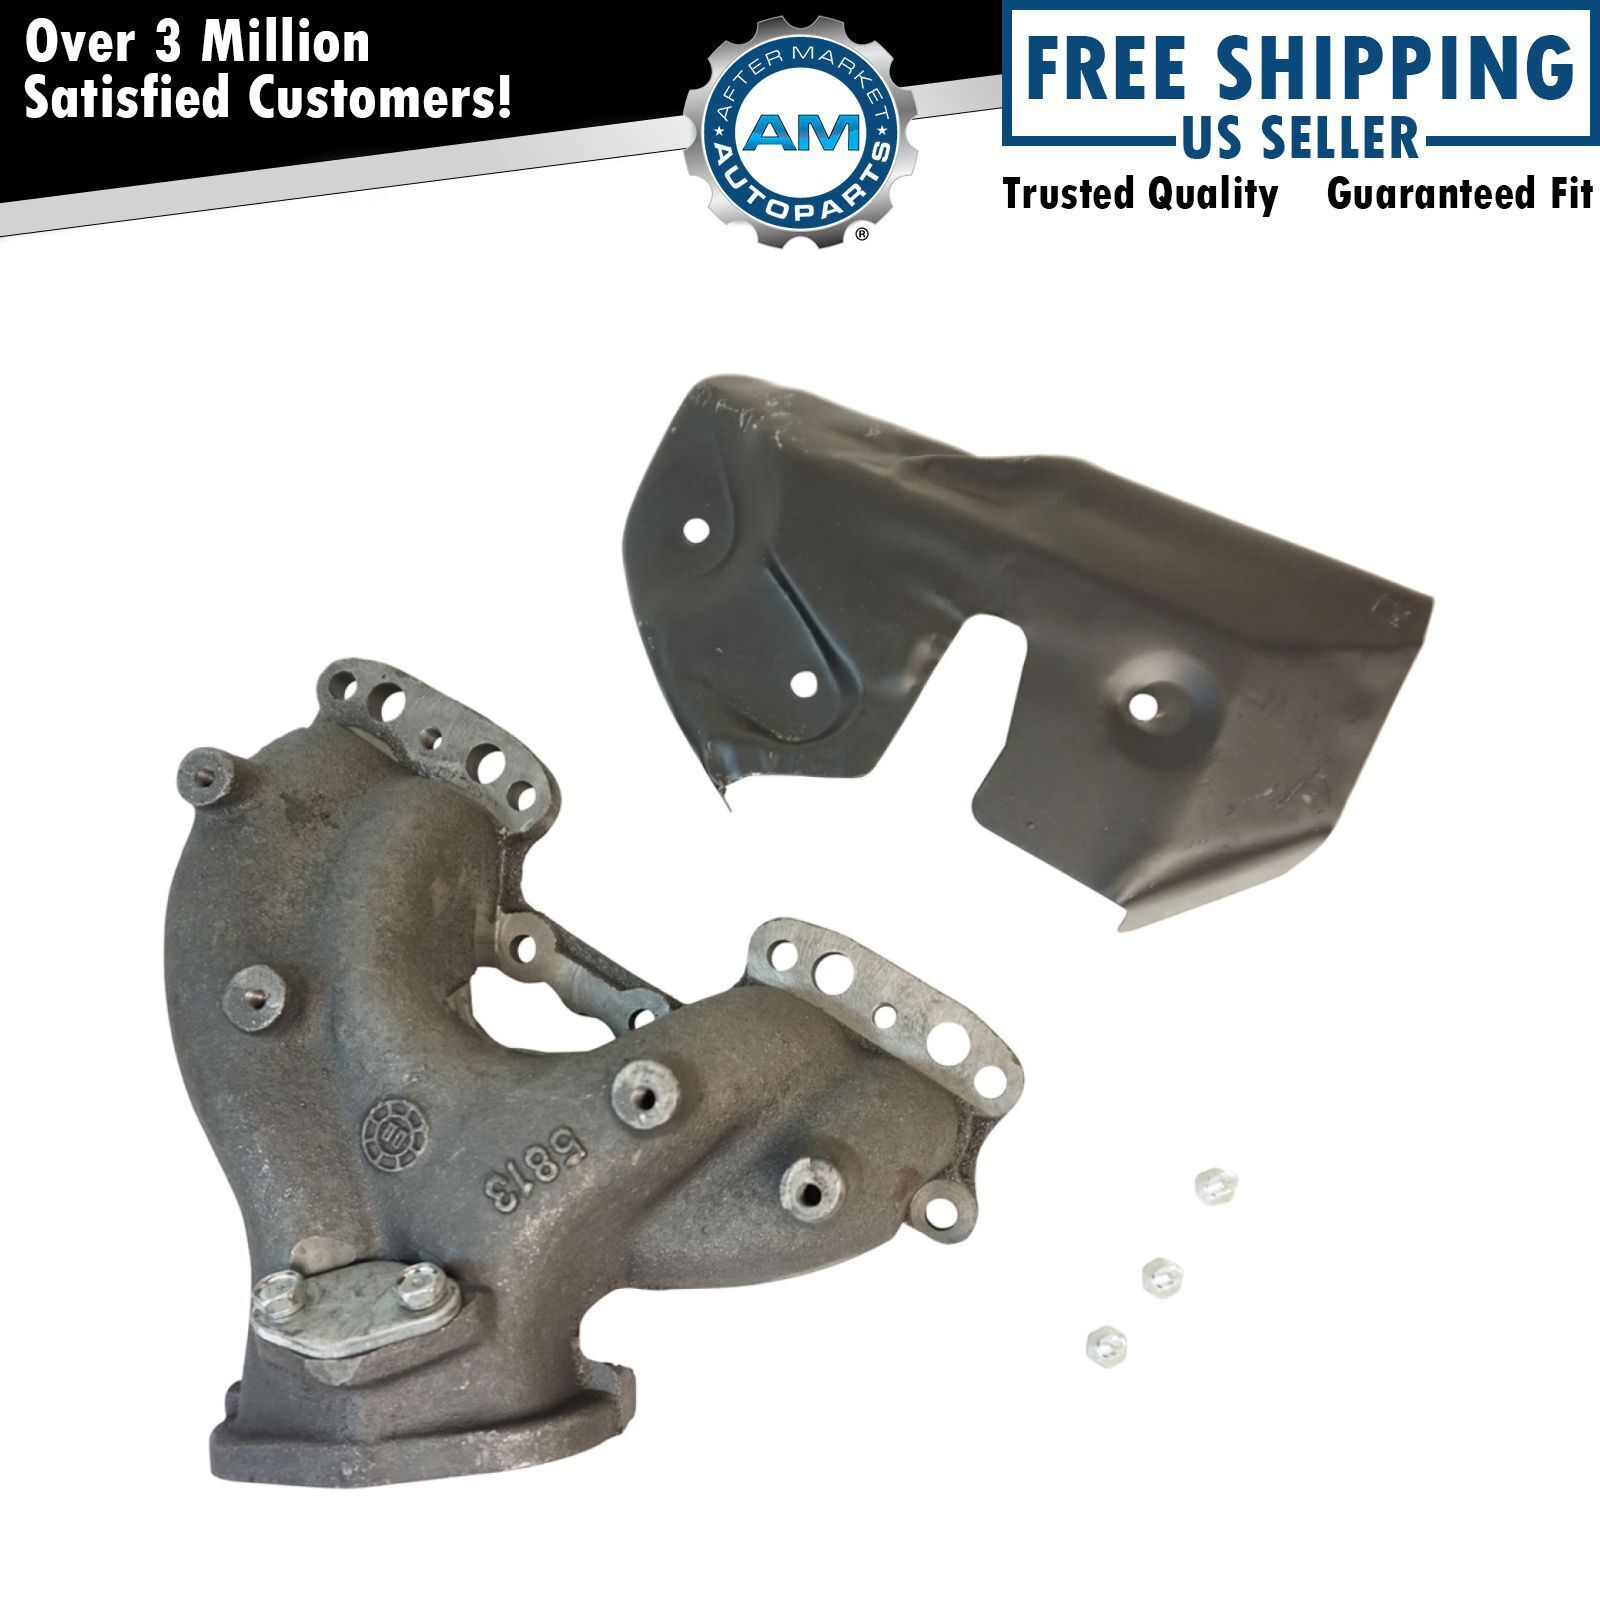 Exhaust Manifold for Toyota 4Runner Pickup Truck 2.4L